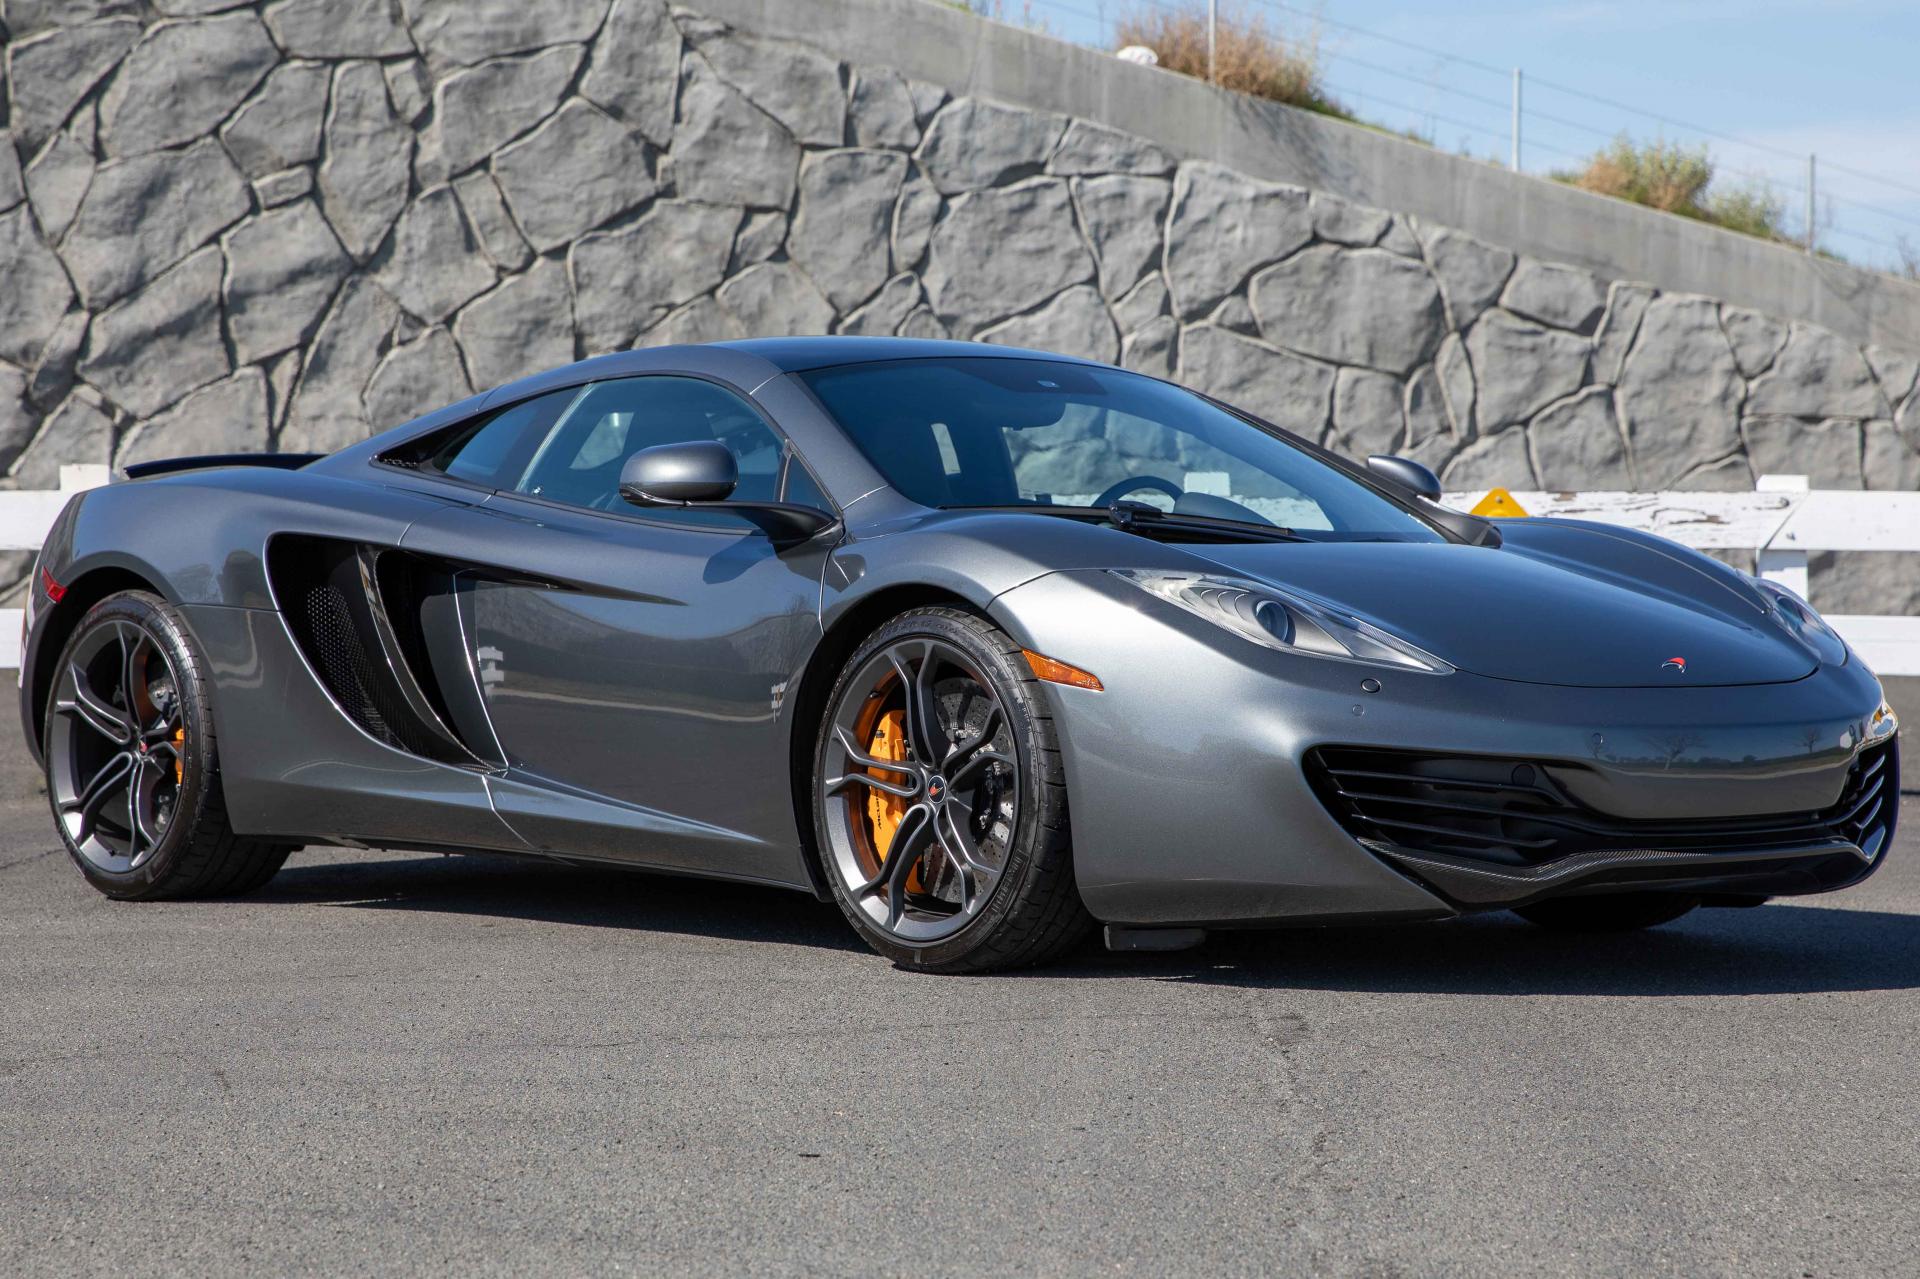 Used 2012 McLaren MP4-12C For Sale (Sold) | West Coast Exotic Cars Stock  #sold36